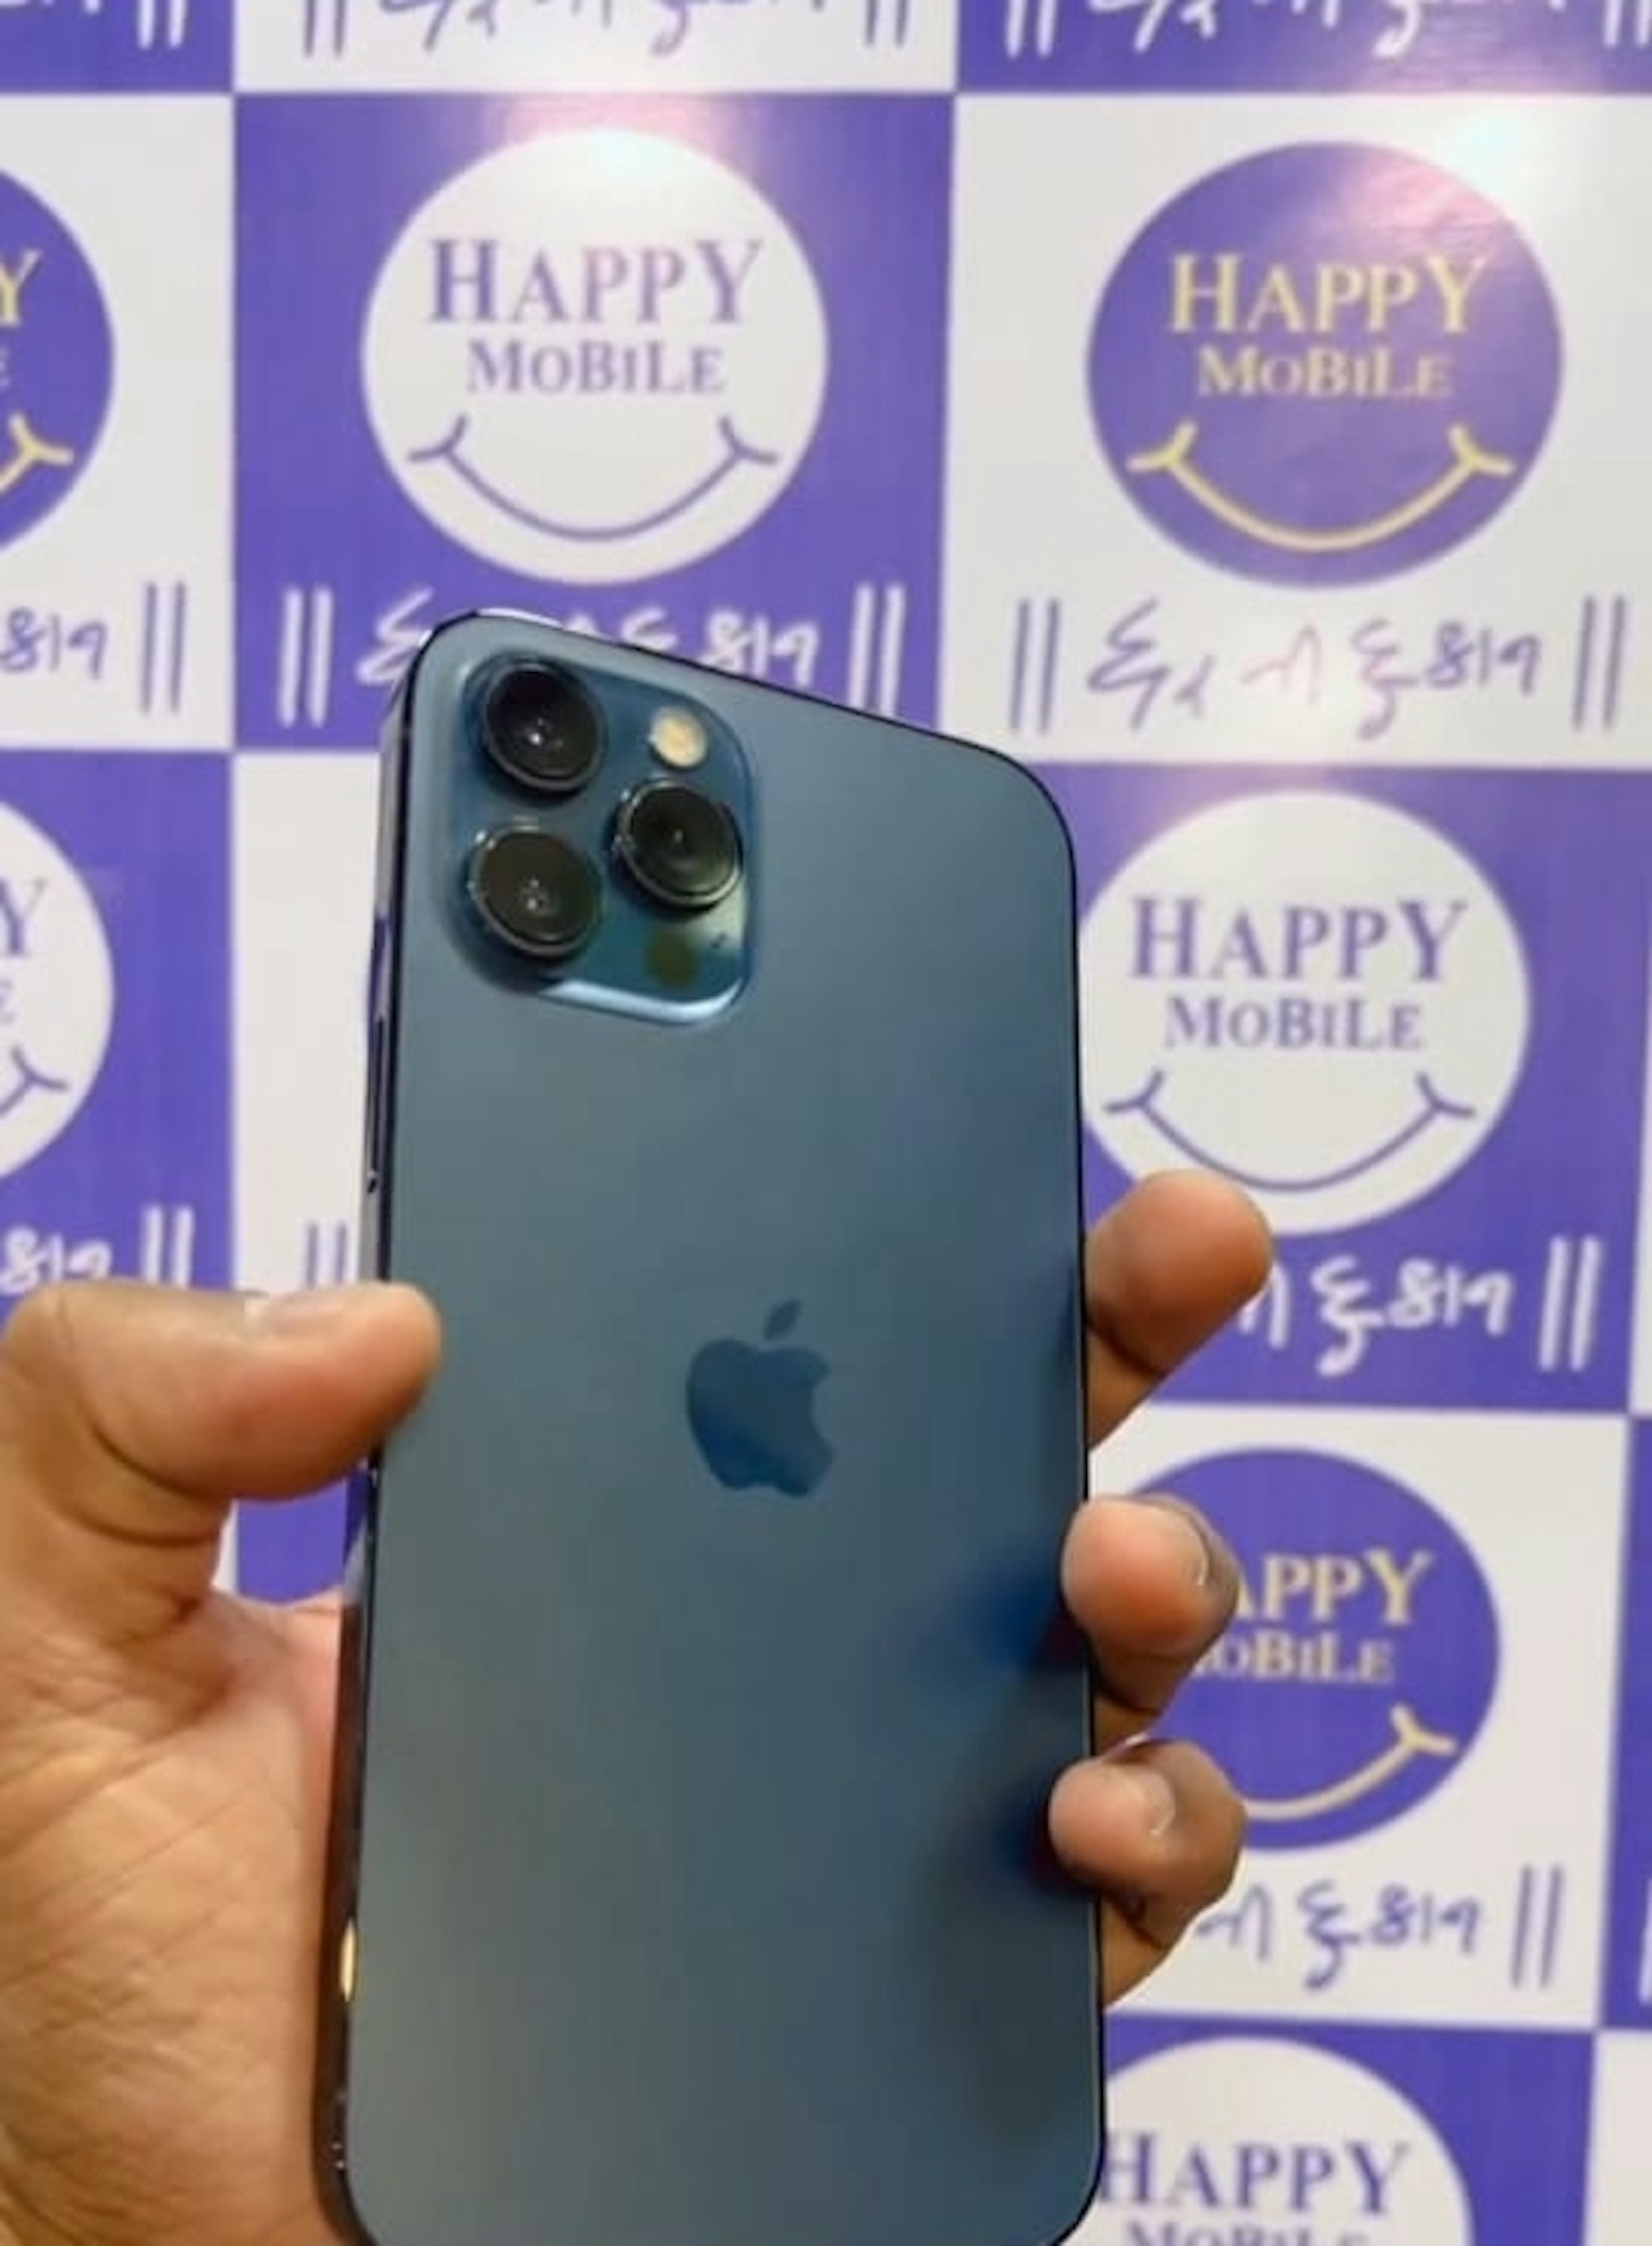 View - Iphone 12 pro max photos, Iphone 12 pro max available in Navsari, make deal in 56999